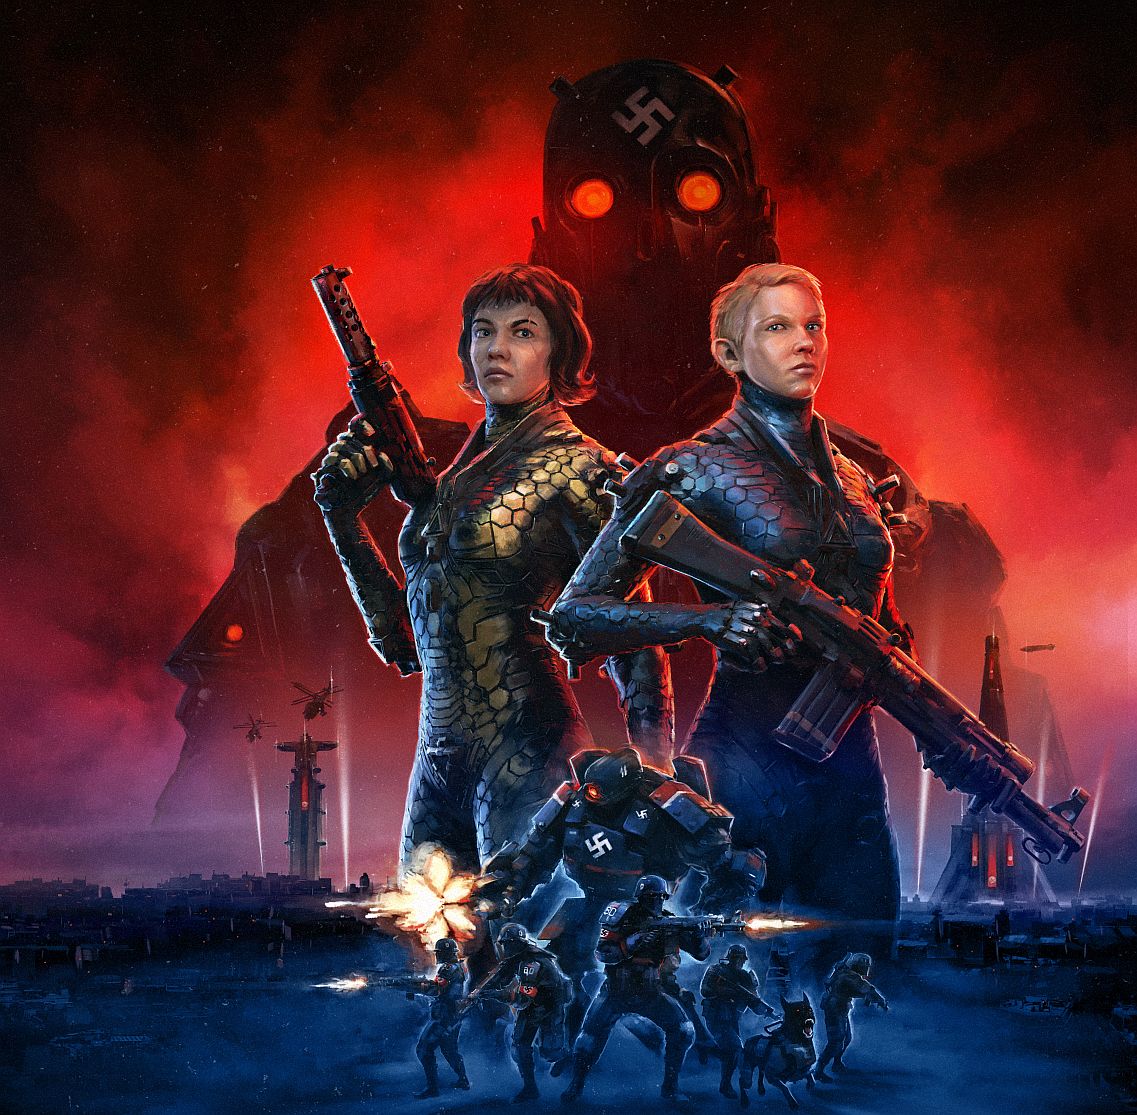 Image for Wolfenstein: Youngblood will take inspiration from Dishonored with more open level designs